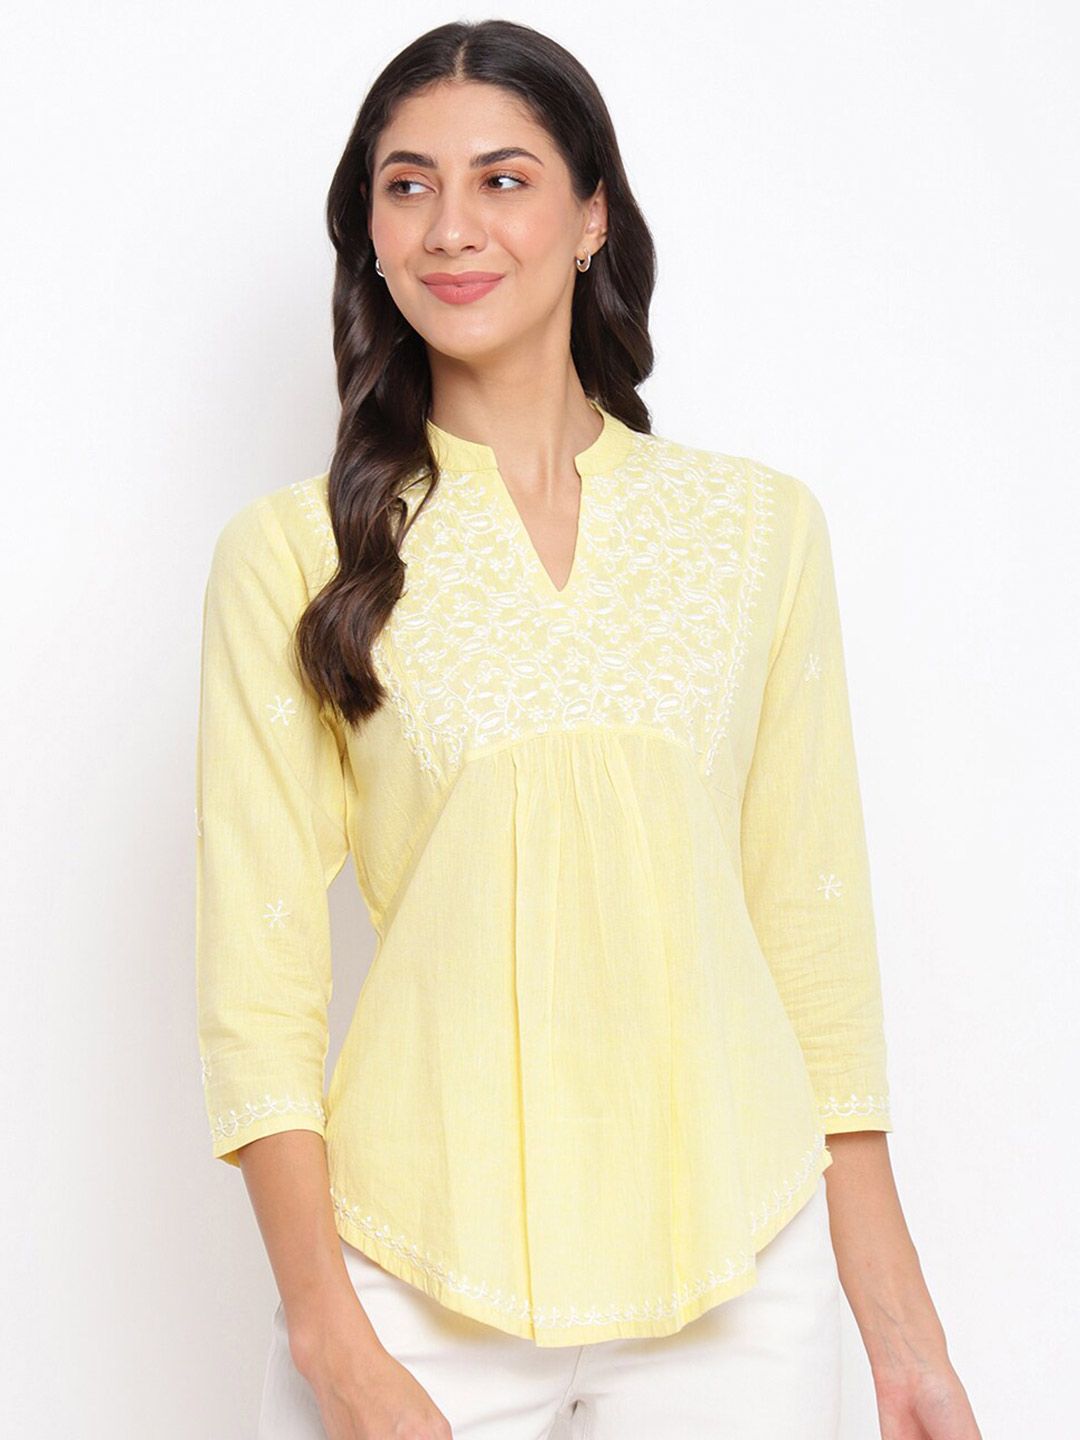 Fabindia Yellow Embroidered Top Price in India